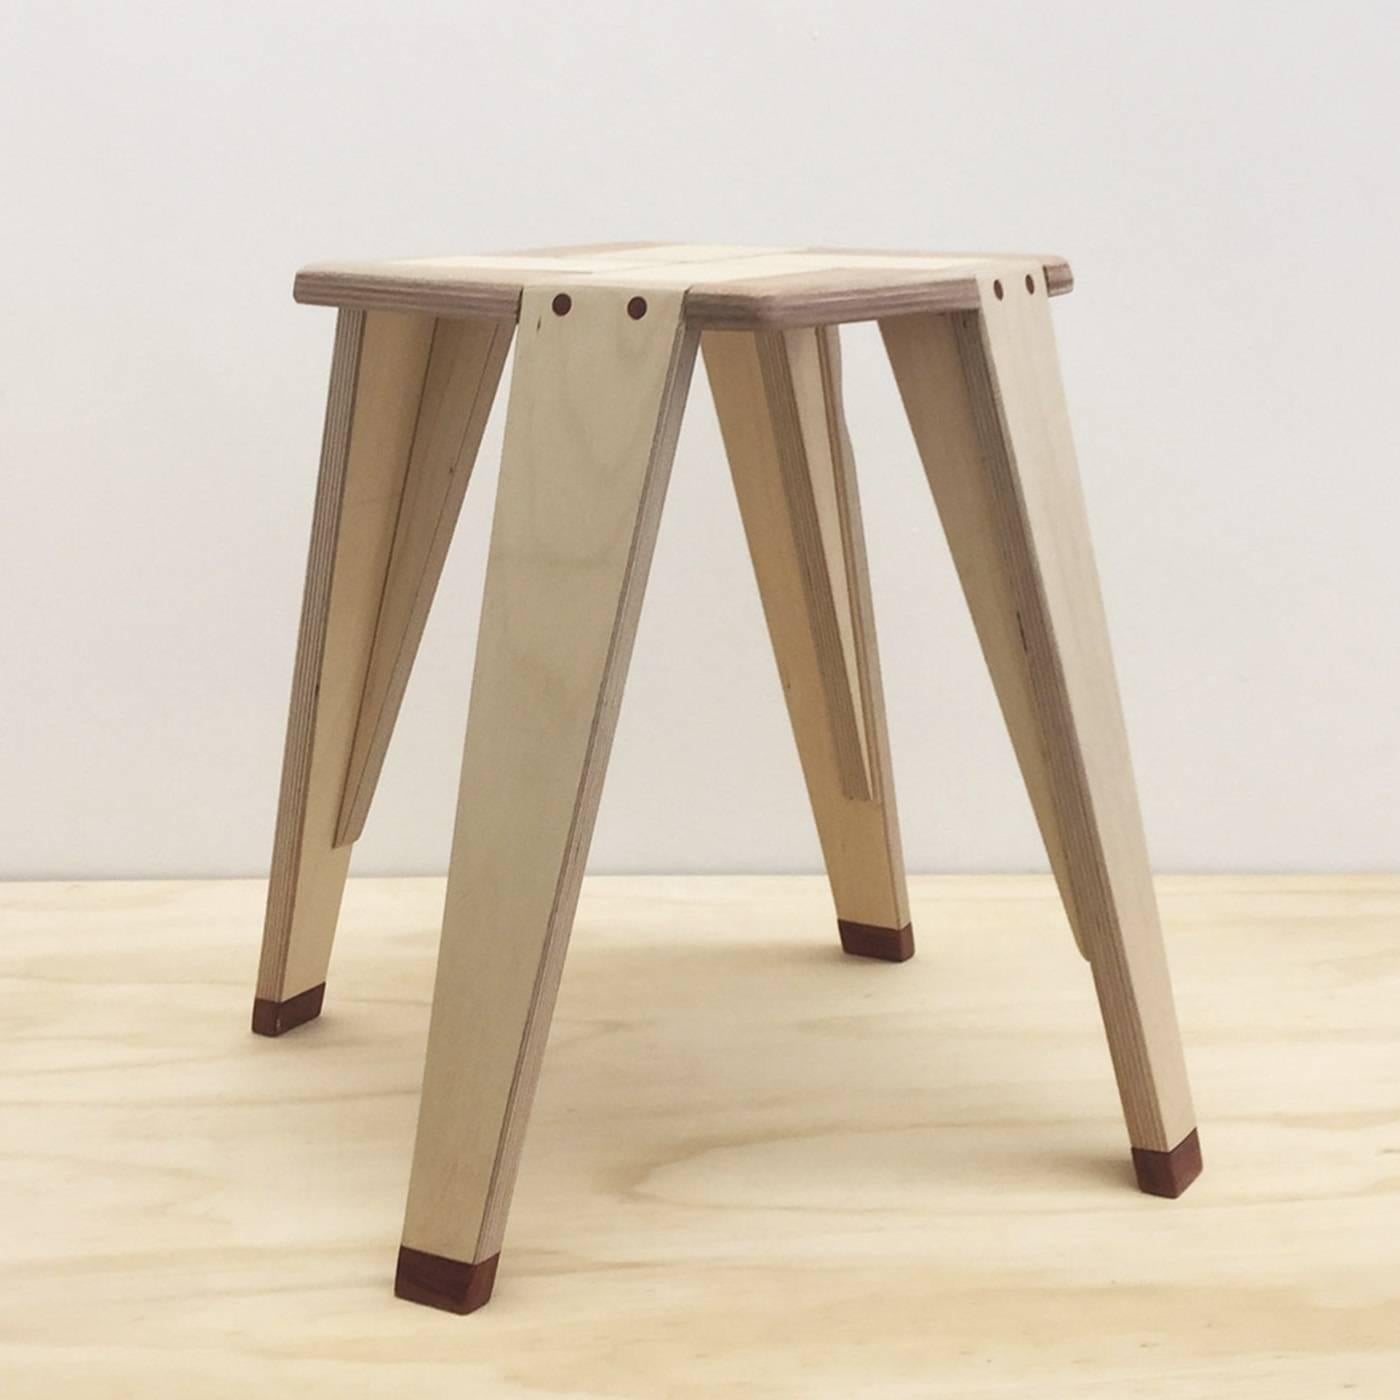 This elegant stool can double as a side table and will enrich a modern decor with its contemporary design and expert craftsmanship. Four legs support the squared top that features inserts in multi-layer birch wood fixed to the structure with solid